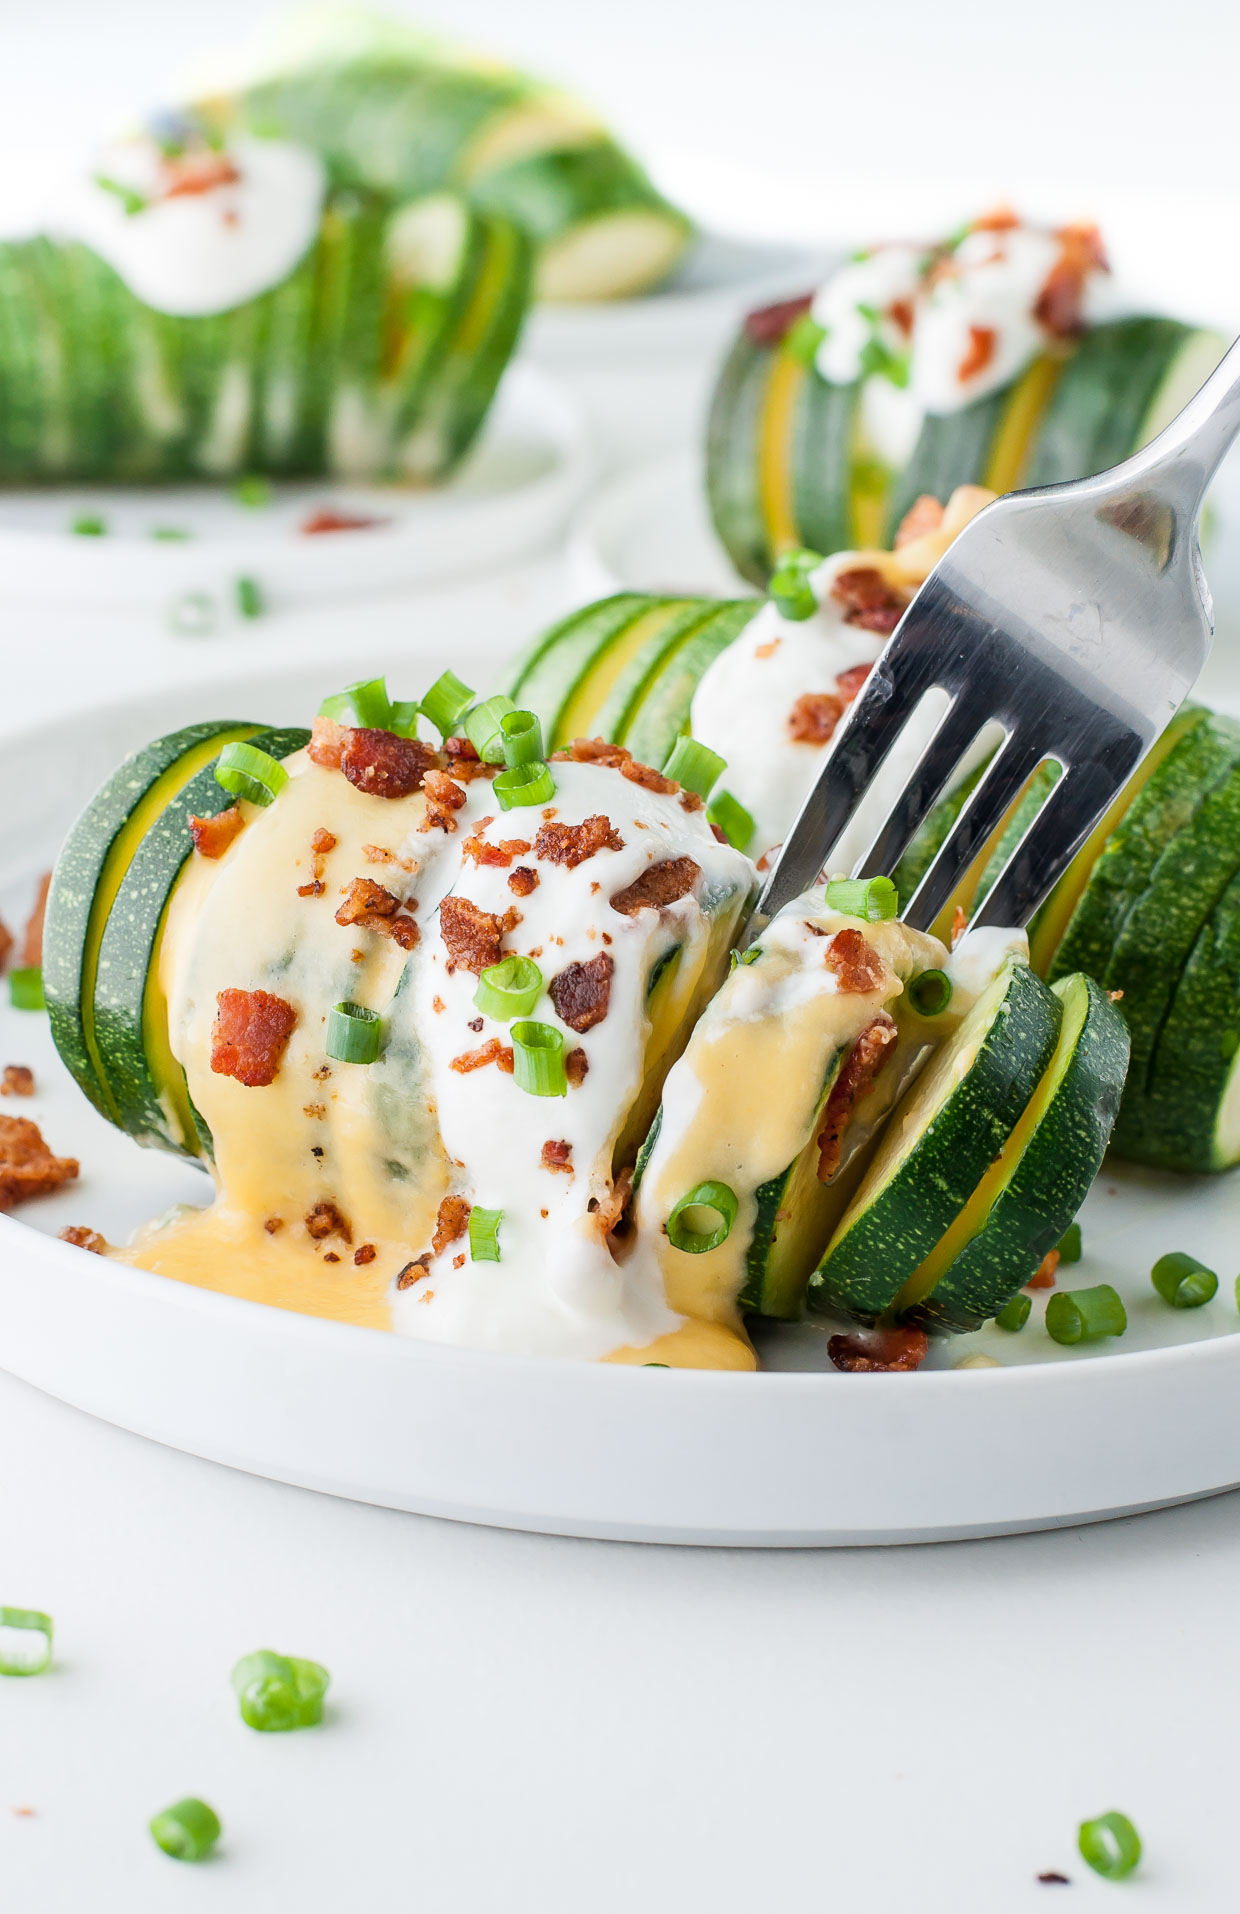 This was pretty much the best thing I put in my face all week. Fully LOADED Hasselback Zucchini!!!